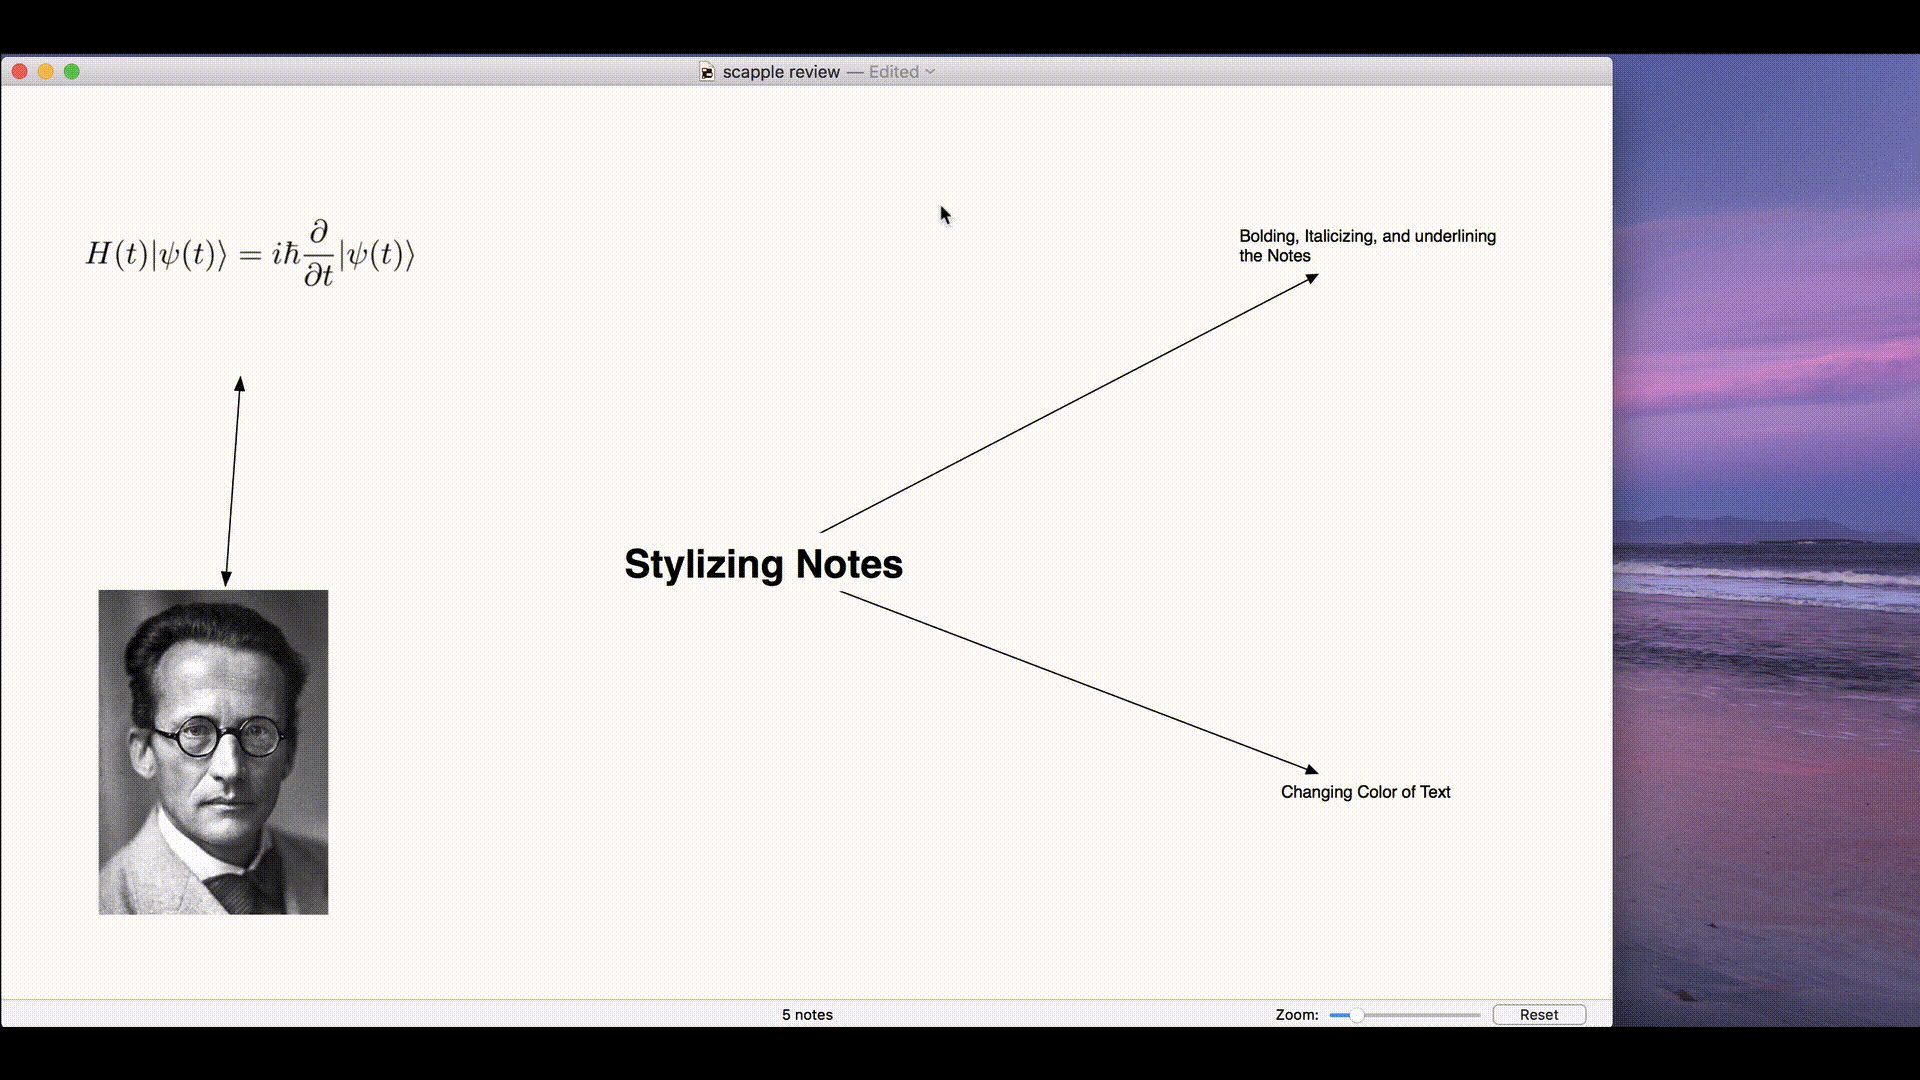 3. Stylizing Notes in Scapple 1